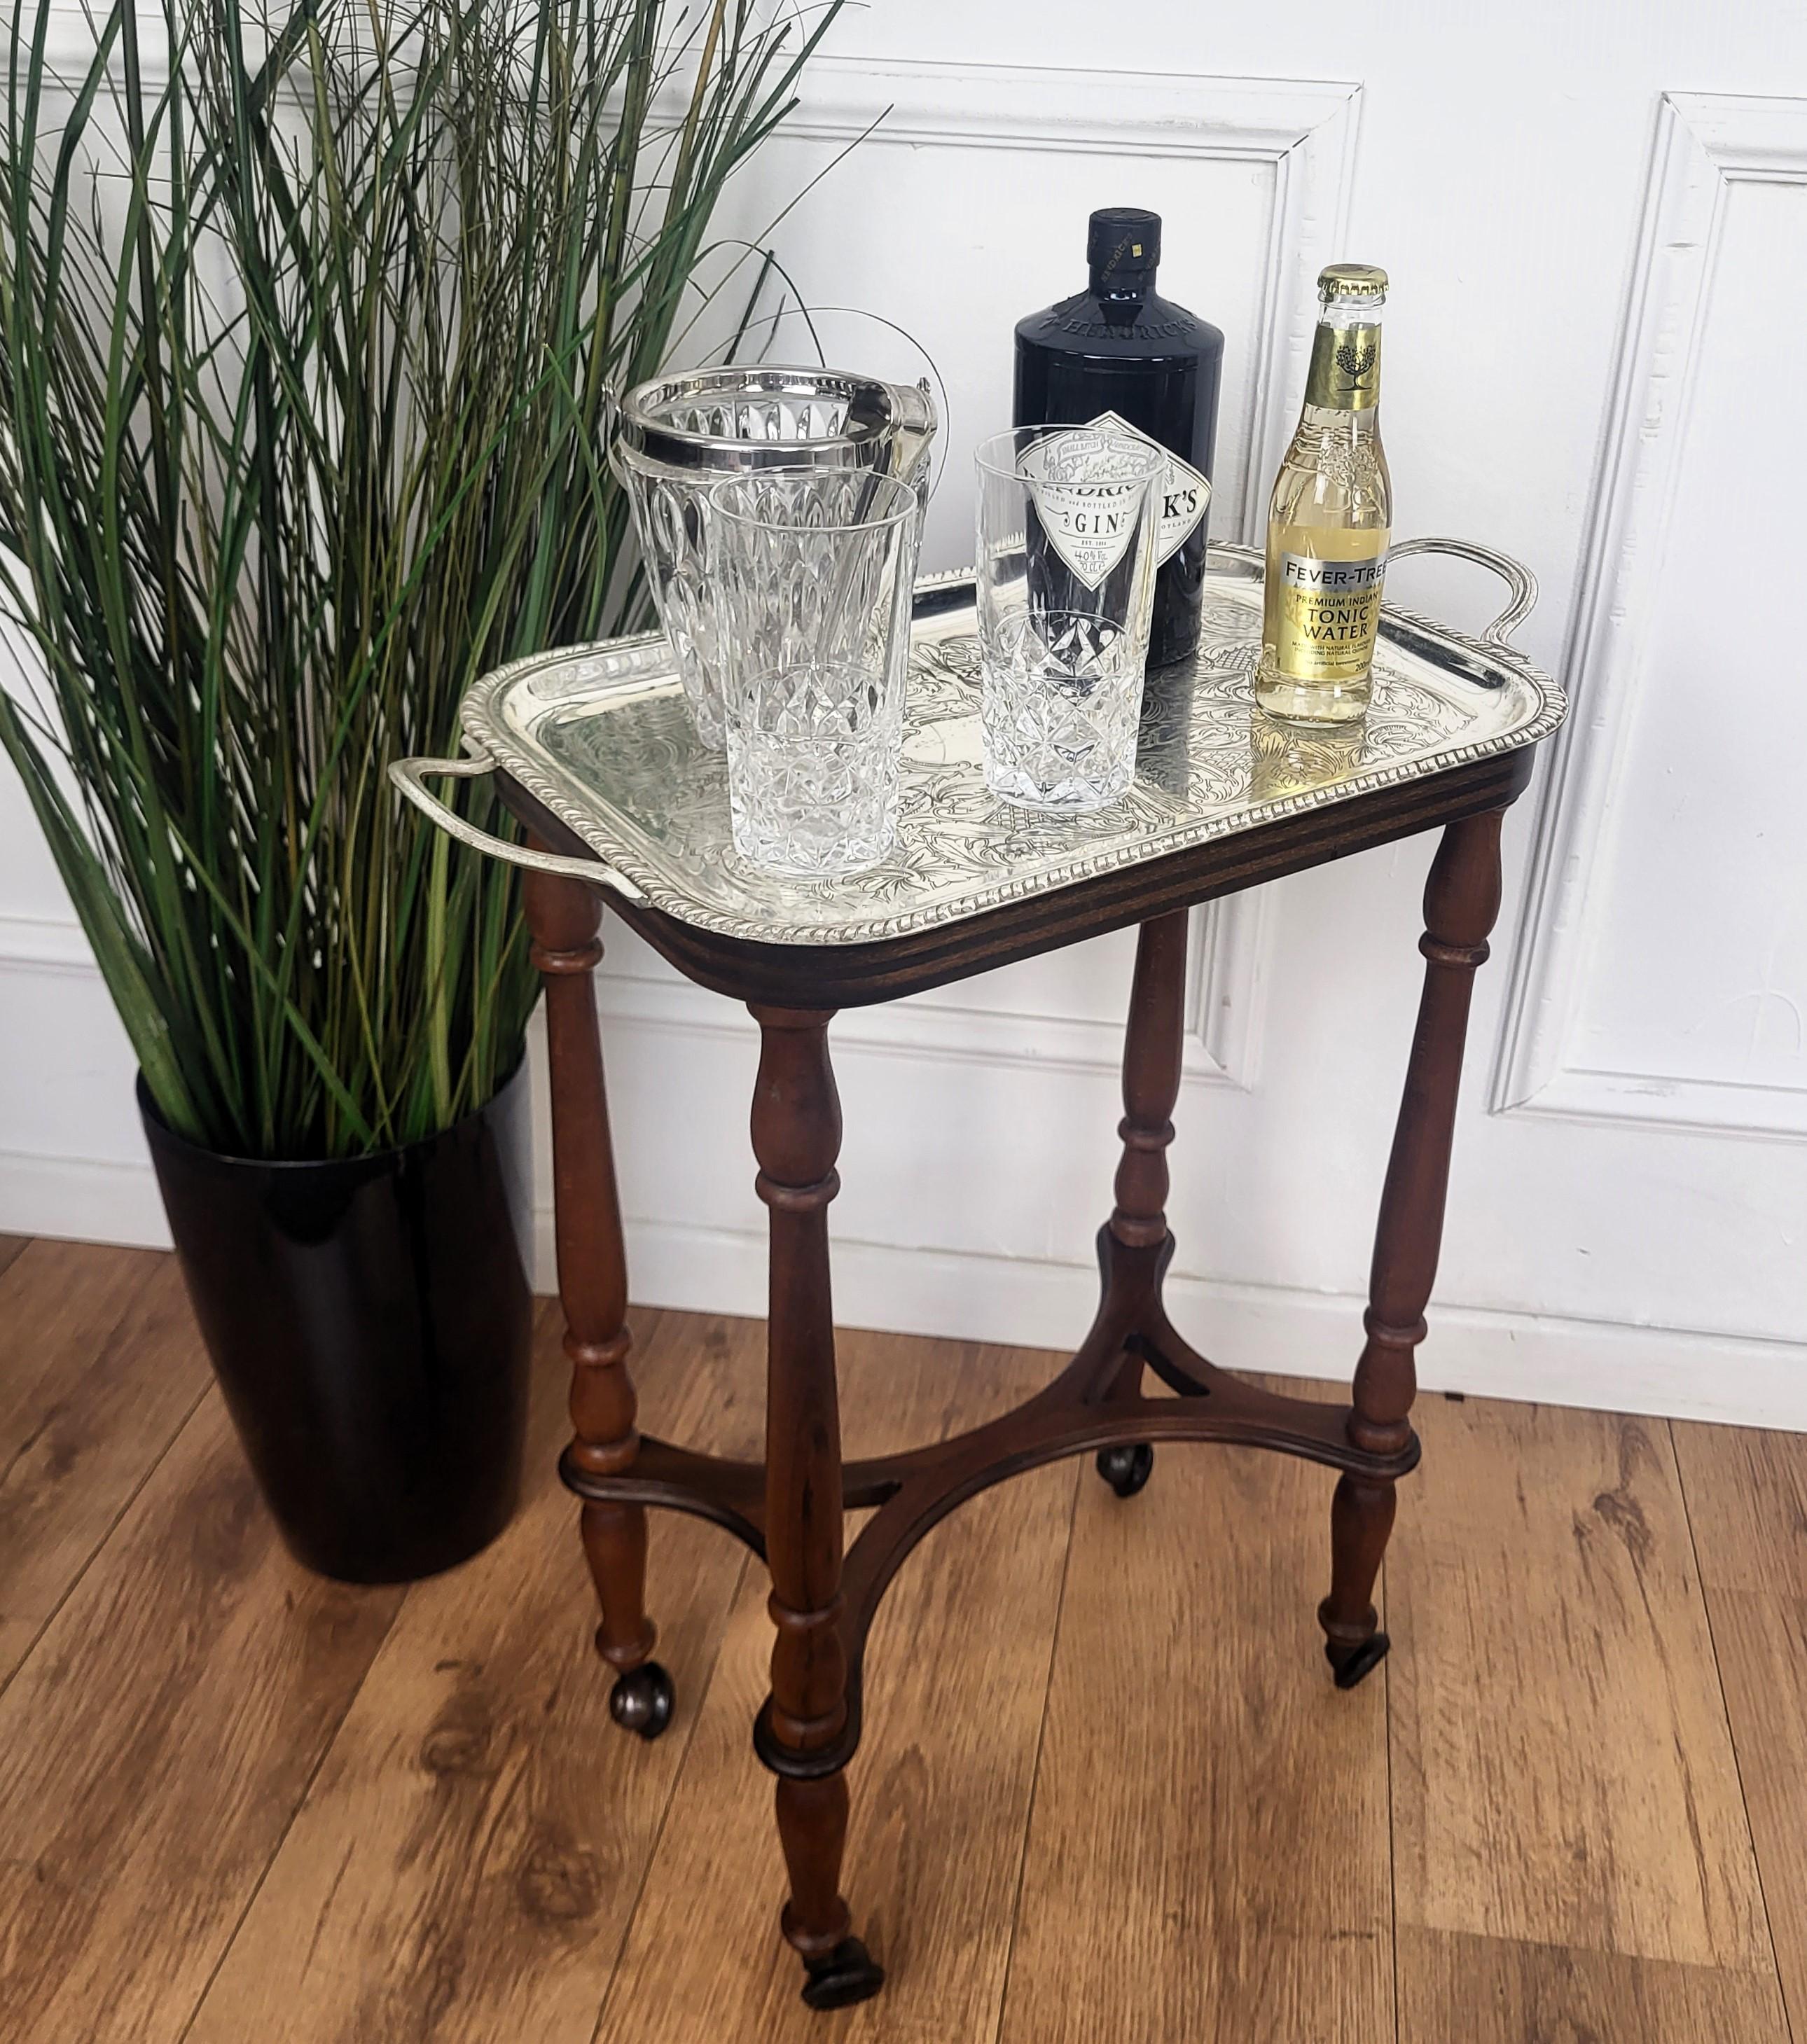 Unique and very elegant Italian Neoclassical MidCentury small serving cart side table with top metal removable tray highlighted by the great wooden structure design and overall shape completed by the details of the original vintage wheels. 